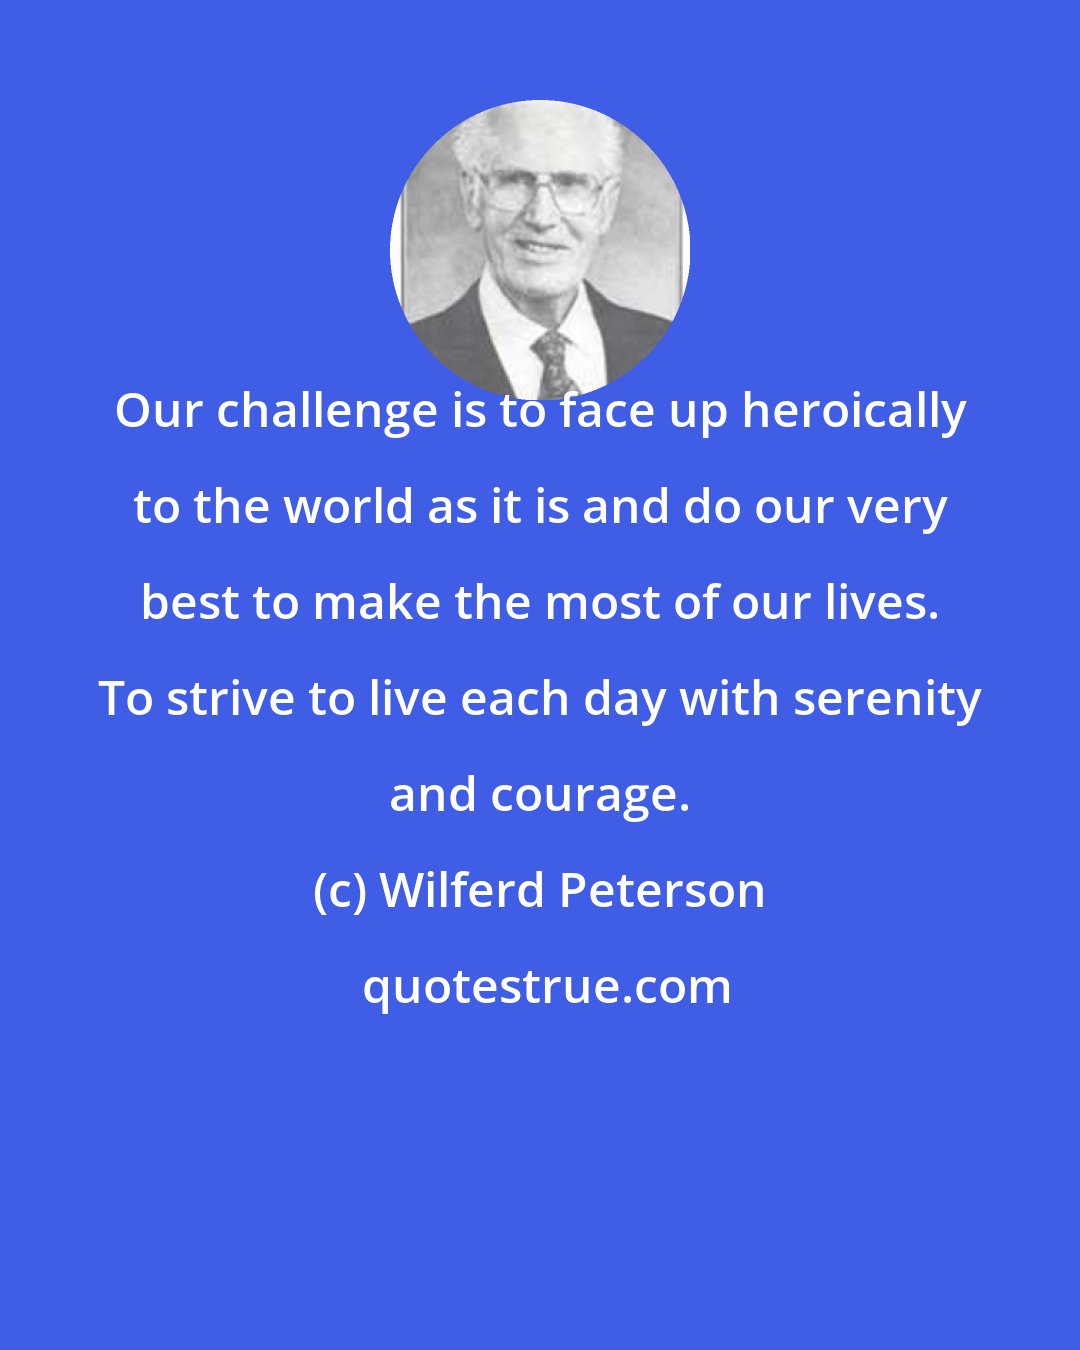 Wilferd Peterson: Our challenge is to face up heroically to the world as it is and do our very best to make the most of our lives. To strive to live each day with serenity and courage.